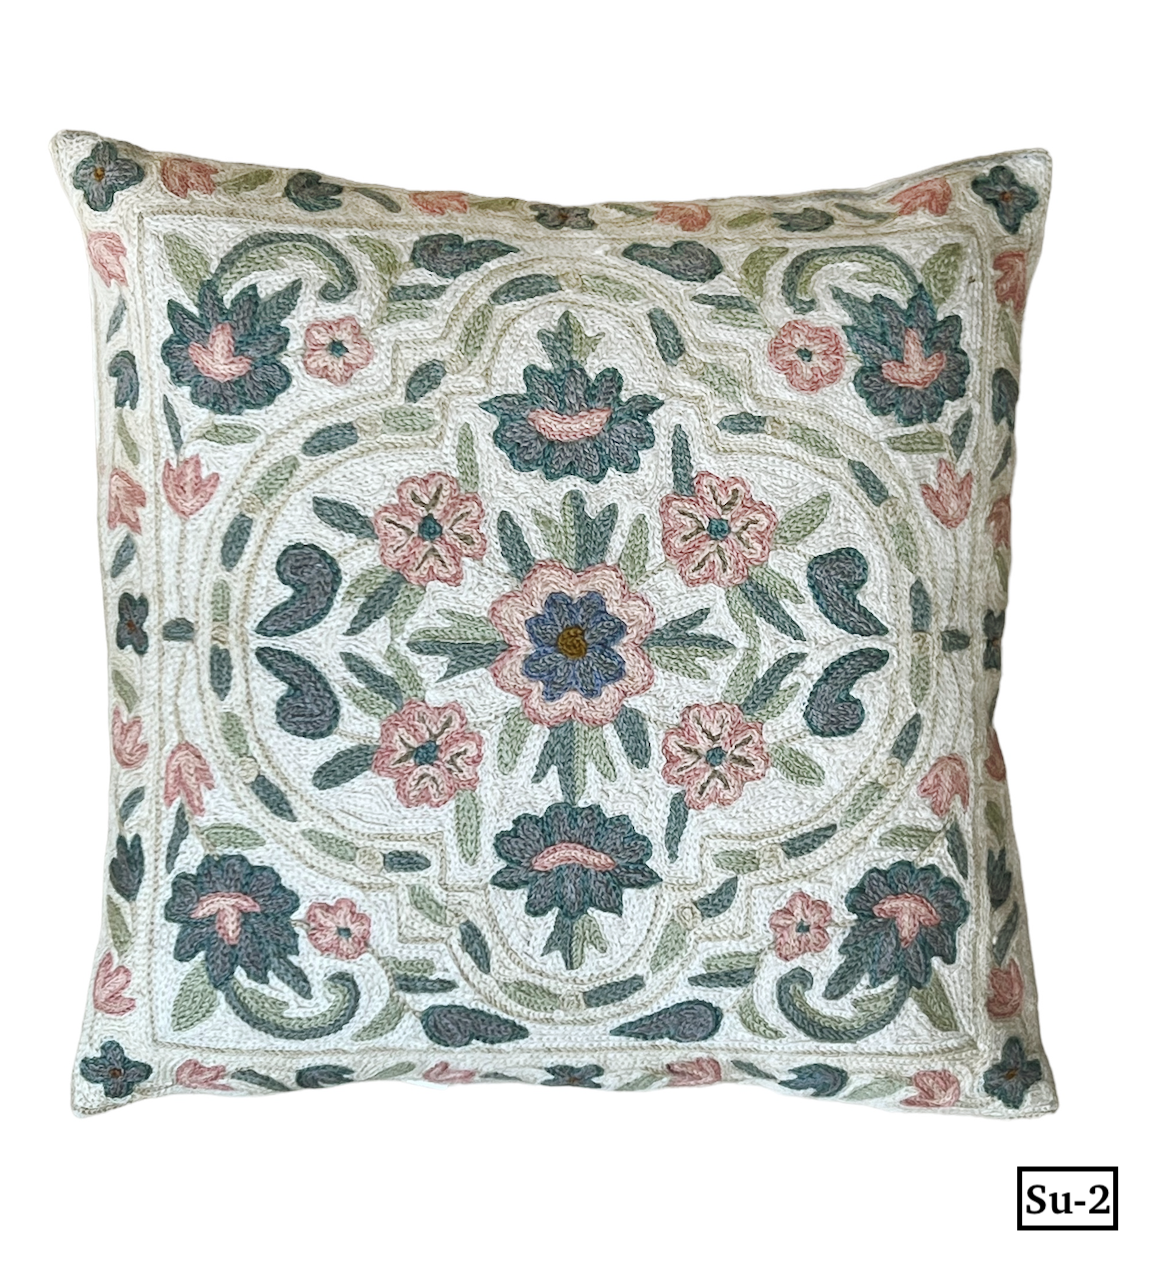 Embroidered wool pillows from India